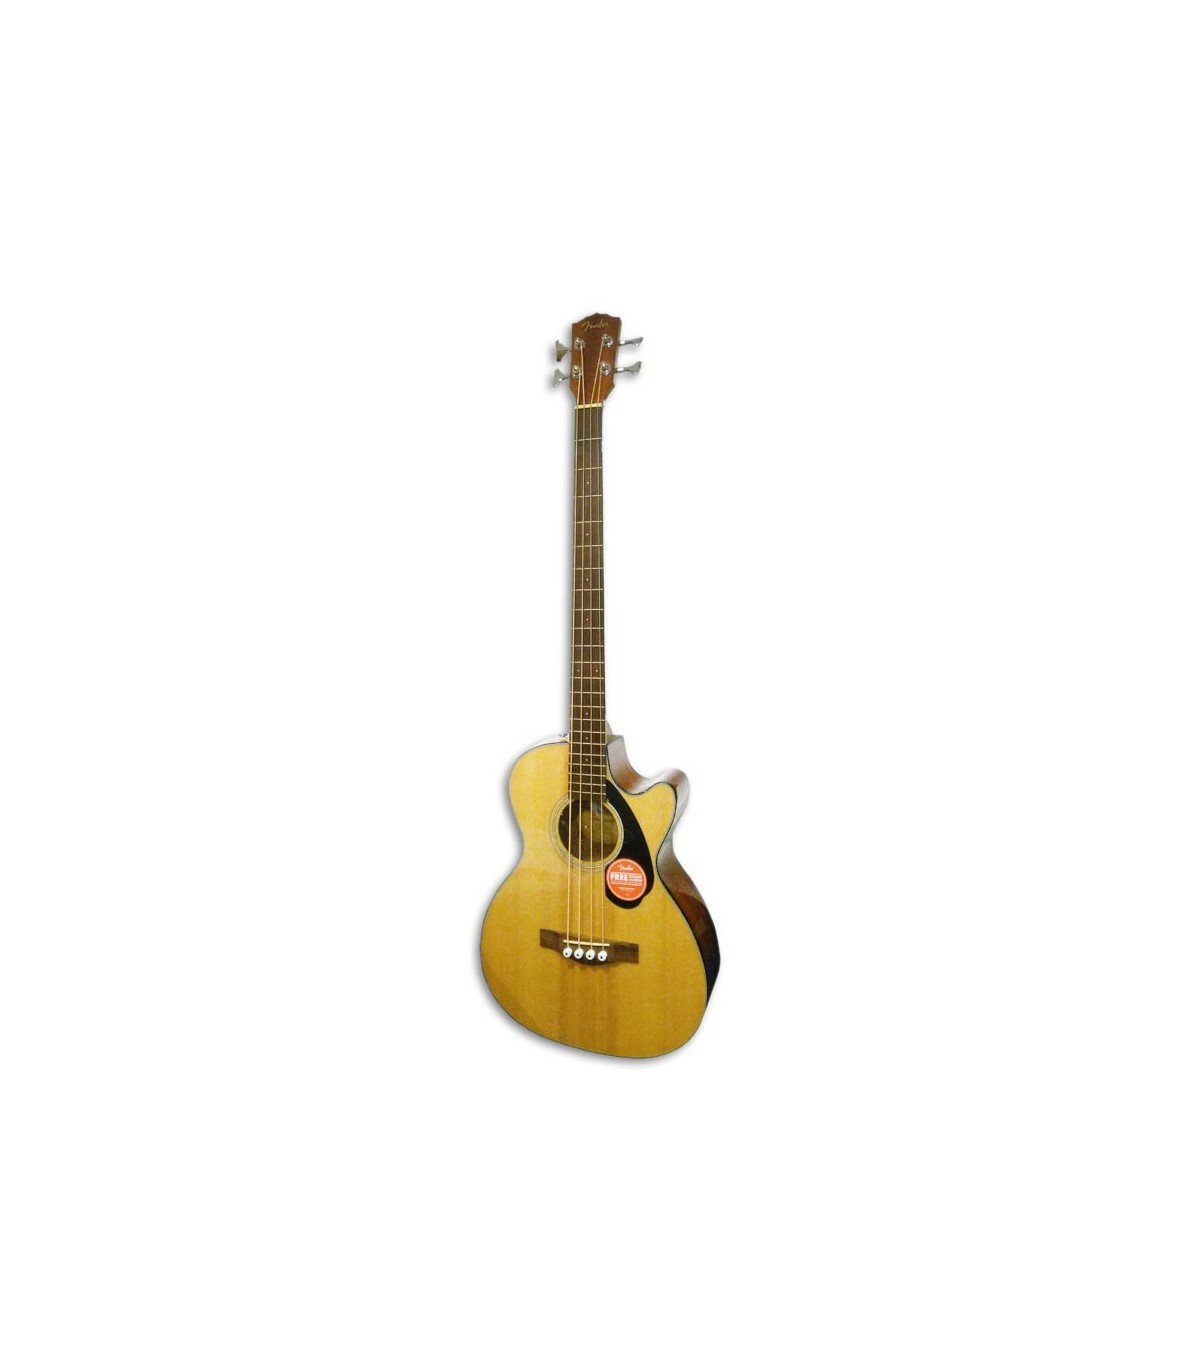 Fender Classic CB SCE Natural   Eletroacoustic bass   Salão